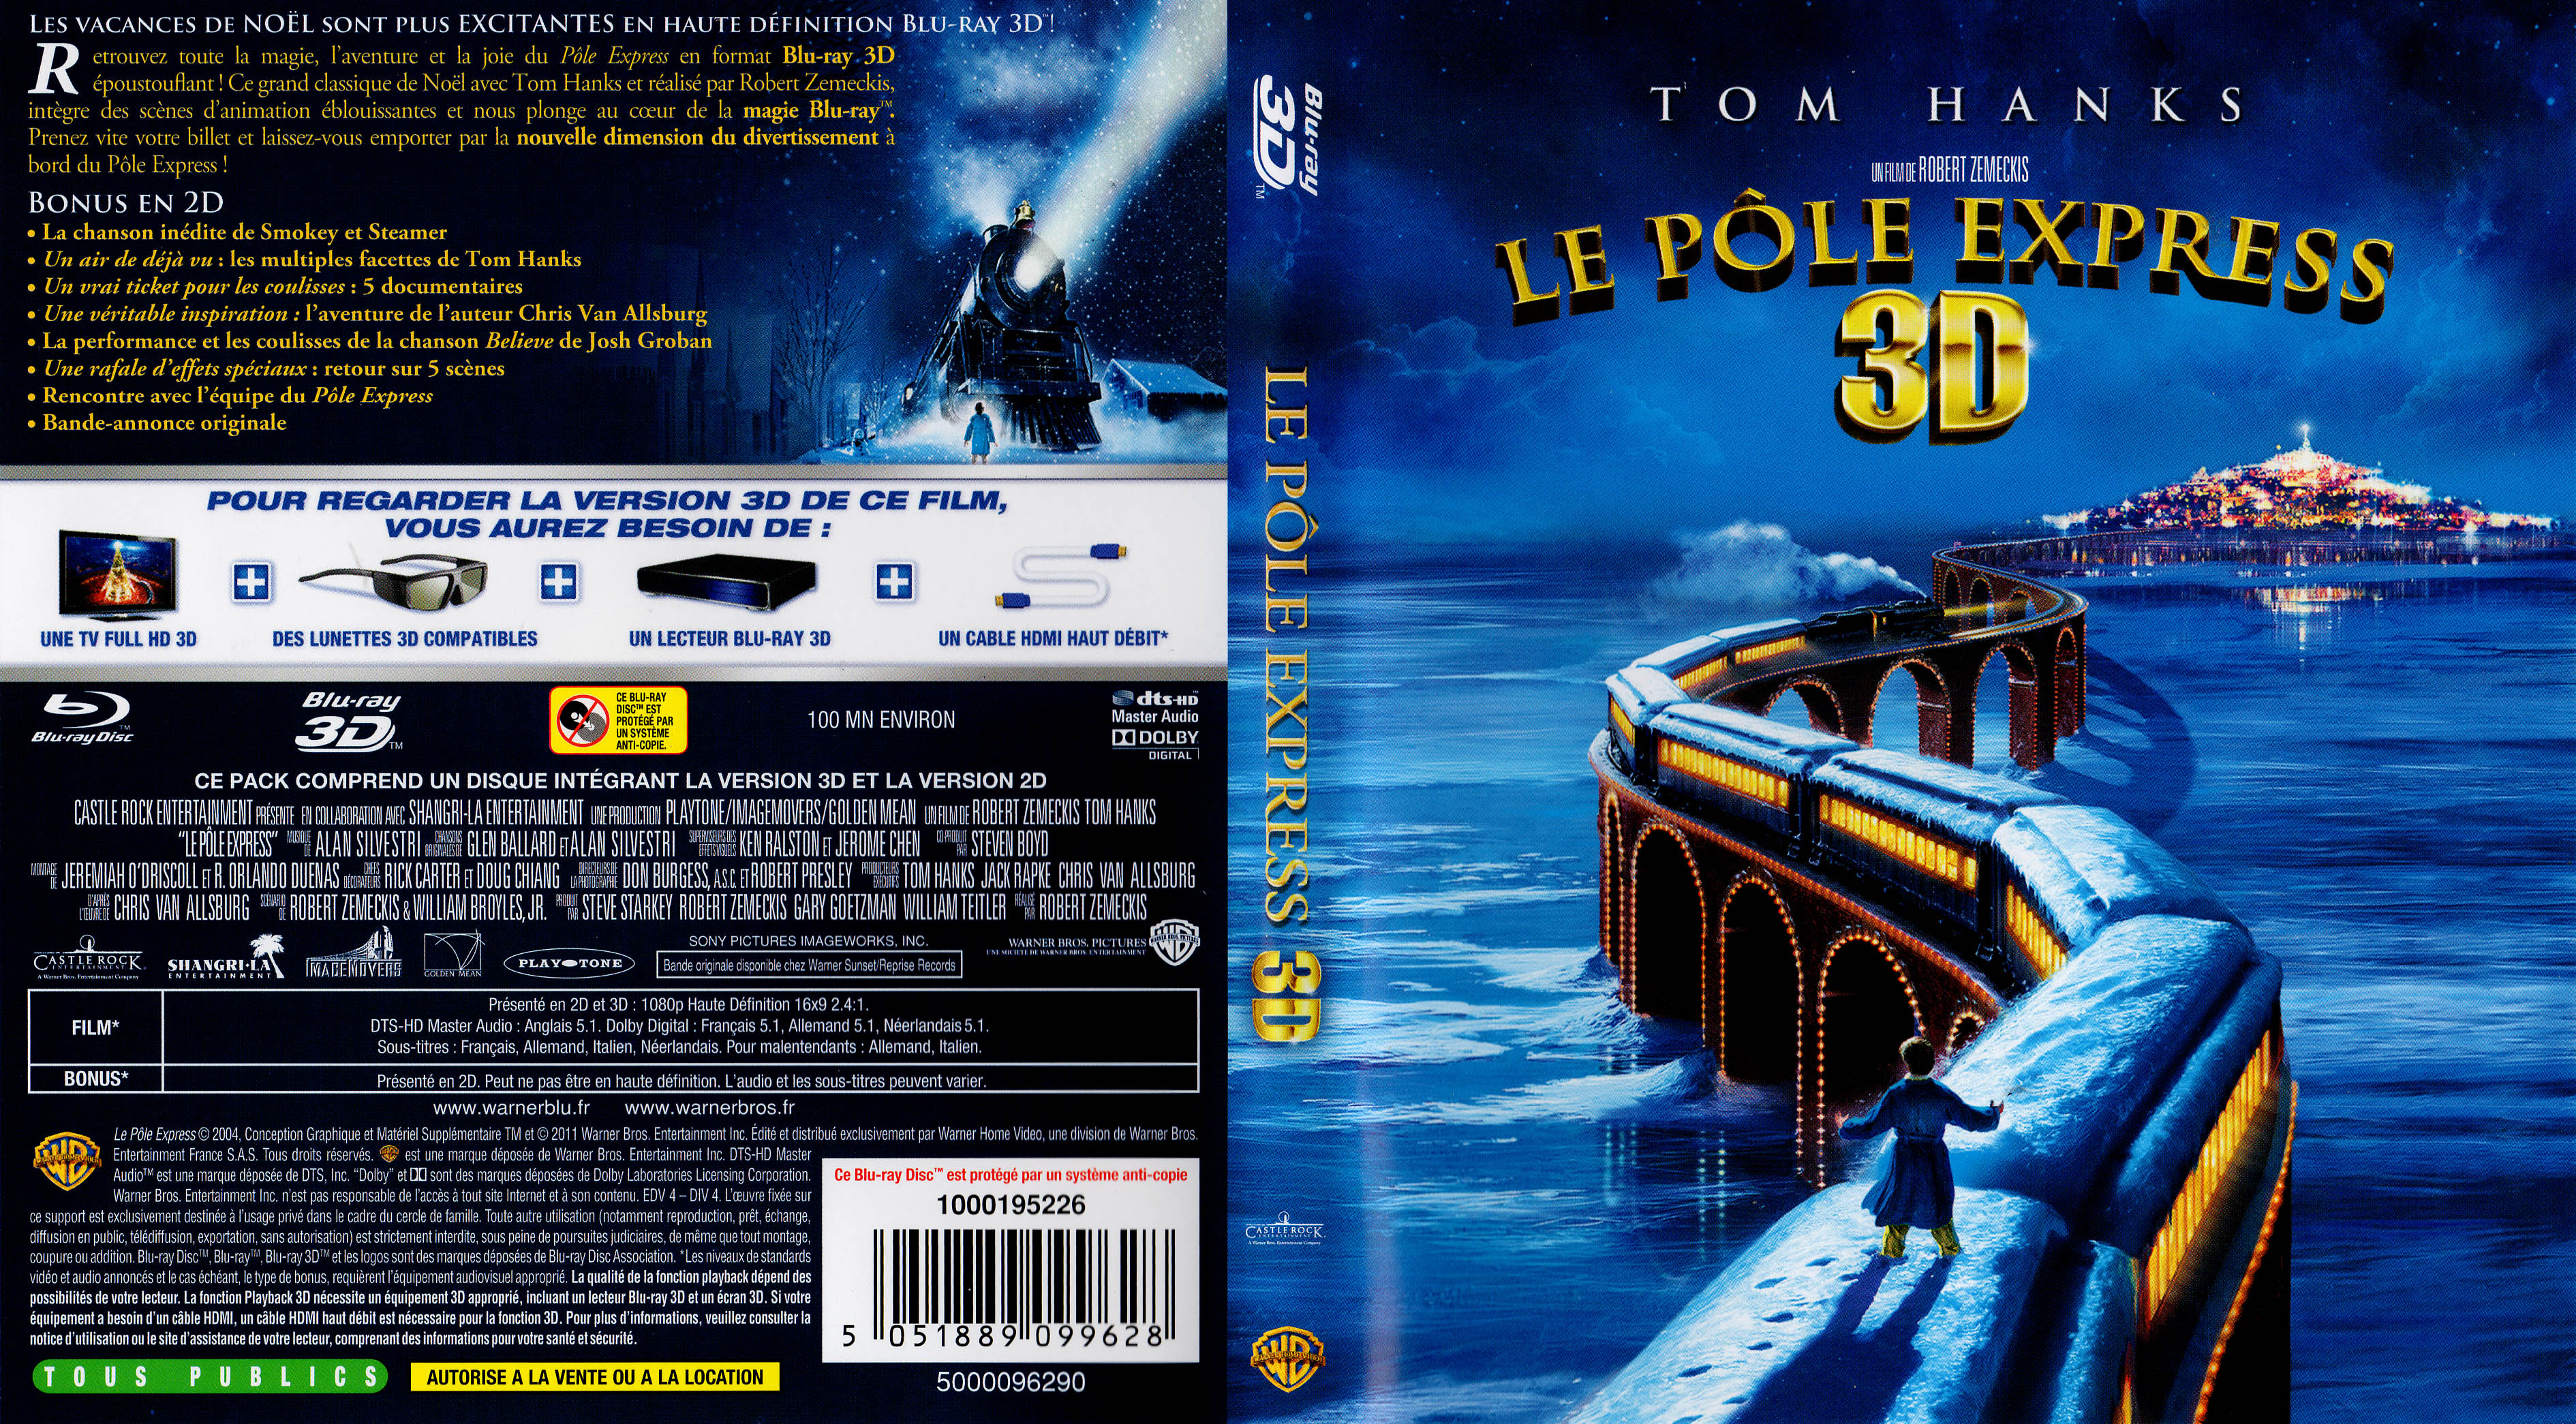 Jaquette DVD Le pole express 3D (BLU-RAY)